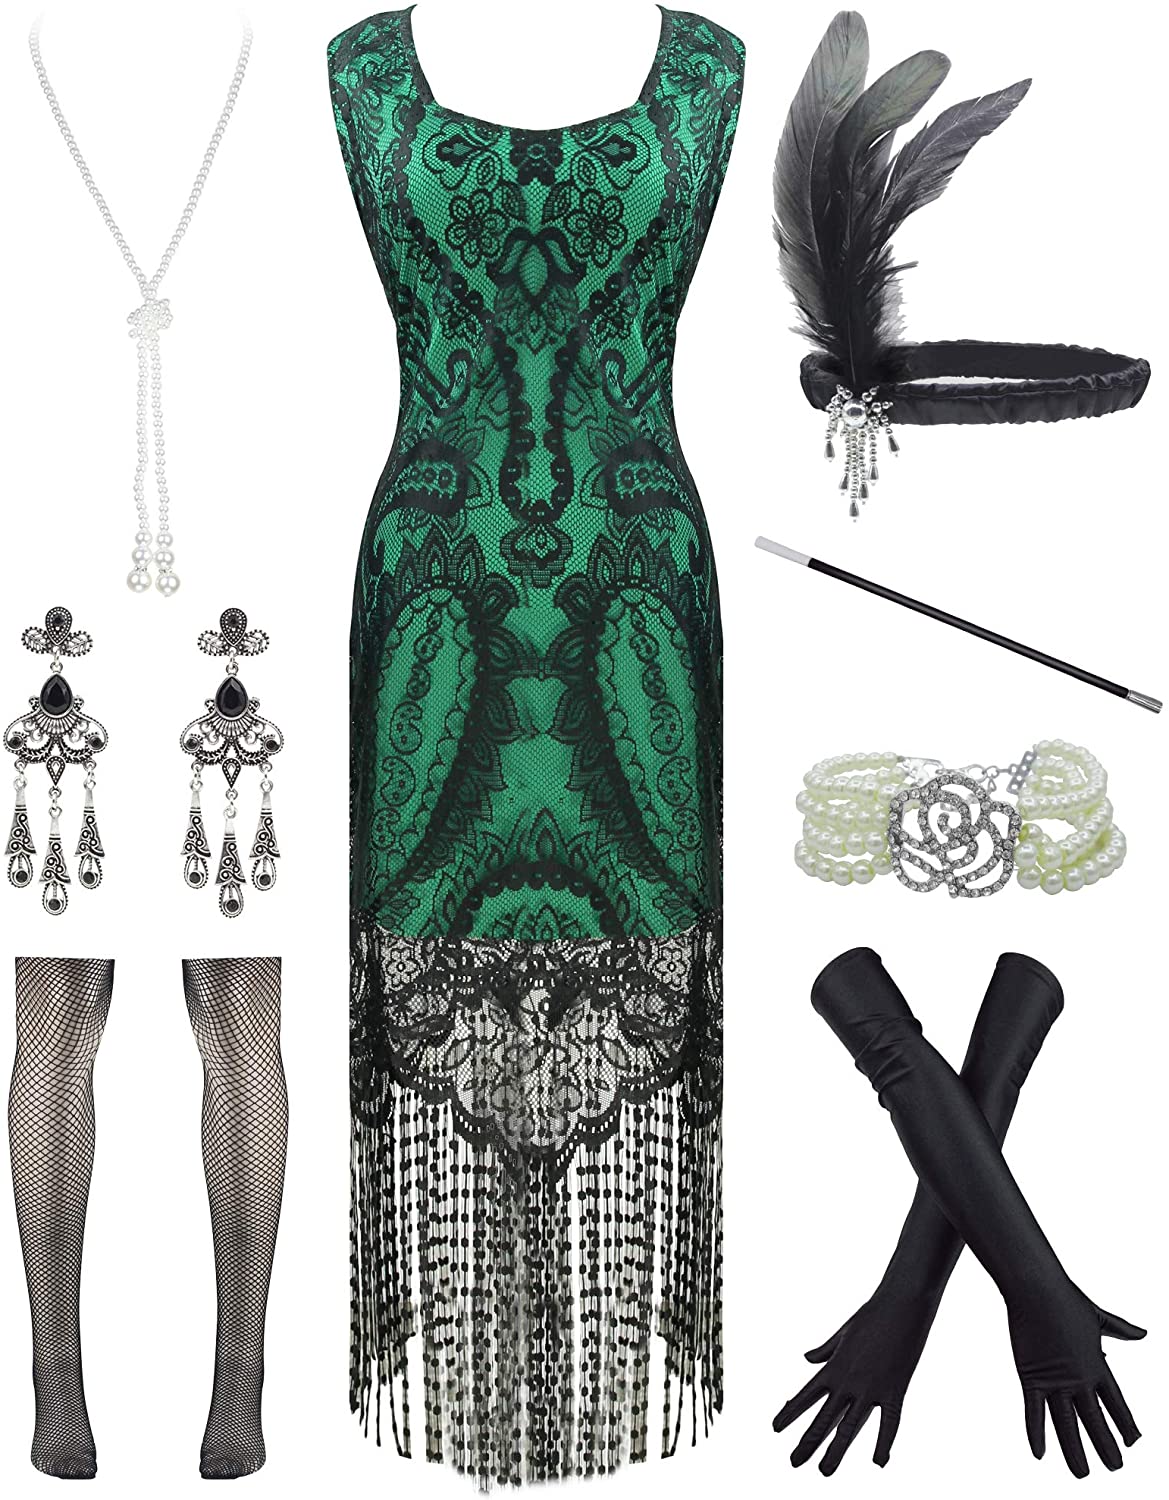 Osislon Women's 1920s Great Gatsby Flapper Fringe Cocktail Party Dress with 20s Accessories Set 